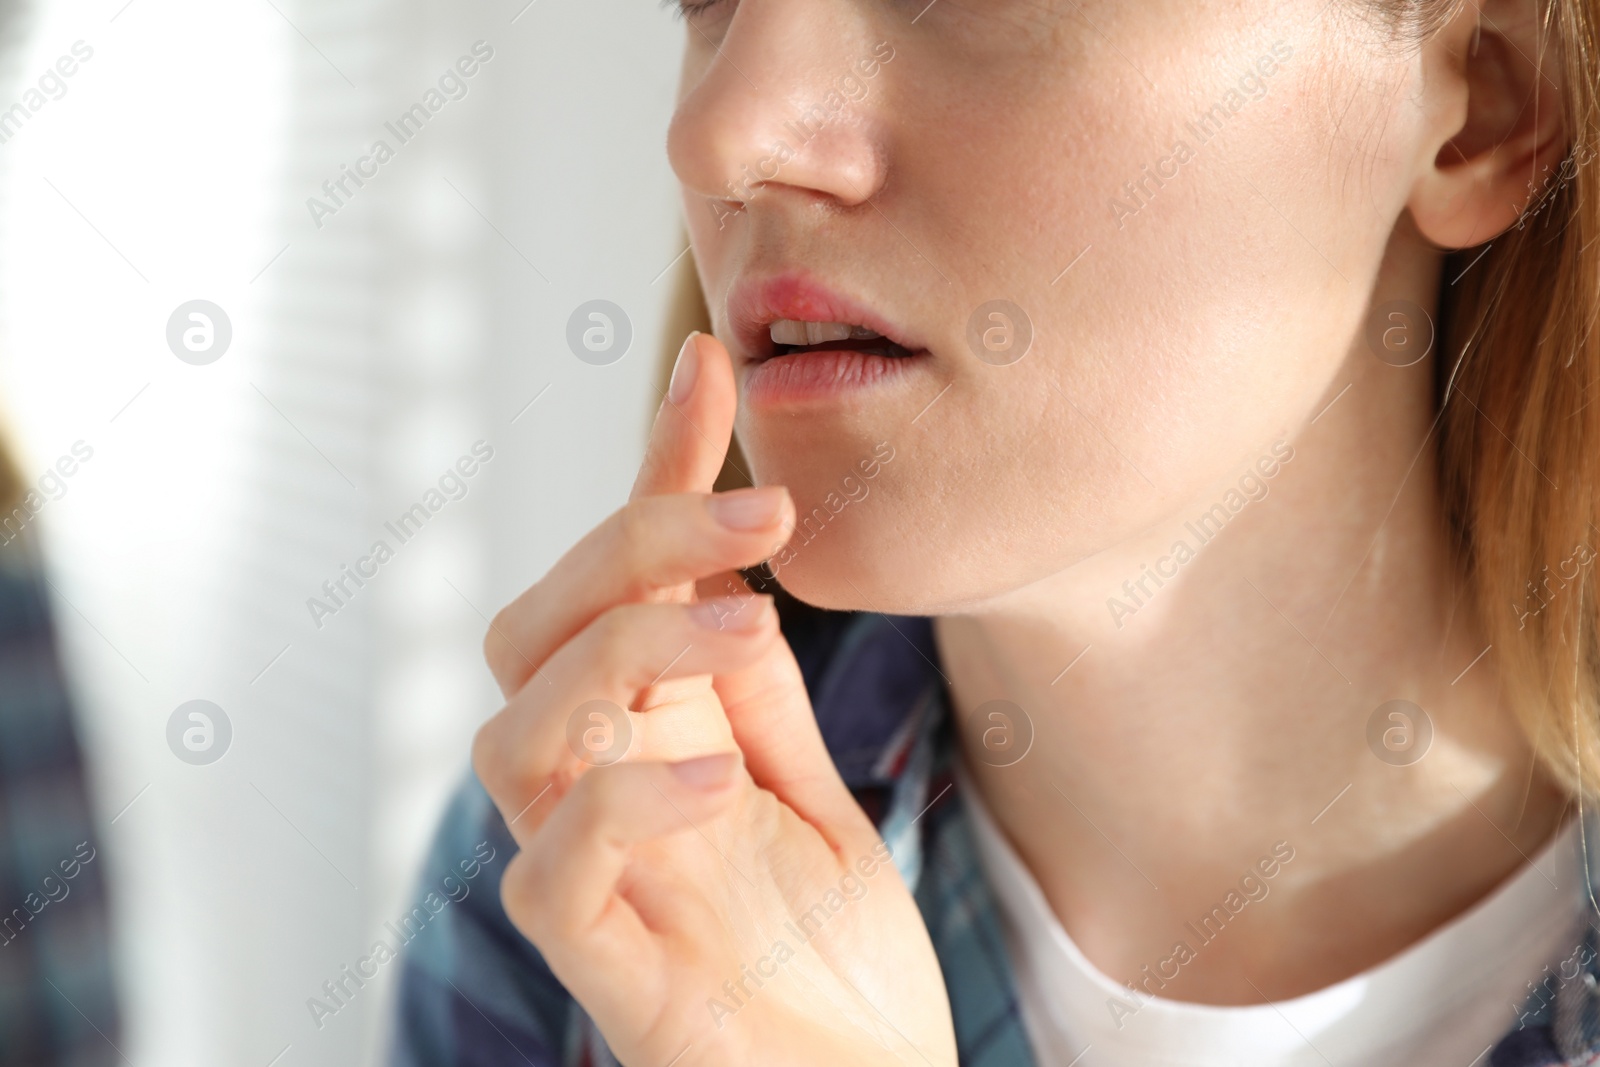 Photo of Woman suffering from herpes against light background, closeup